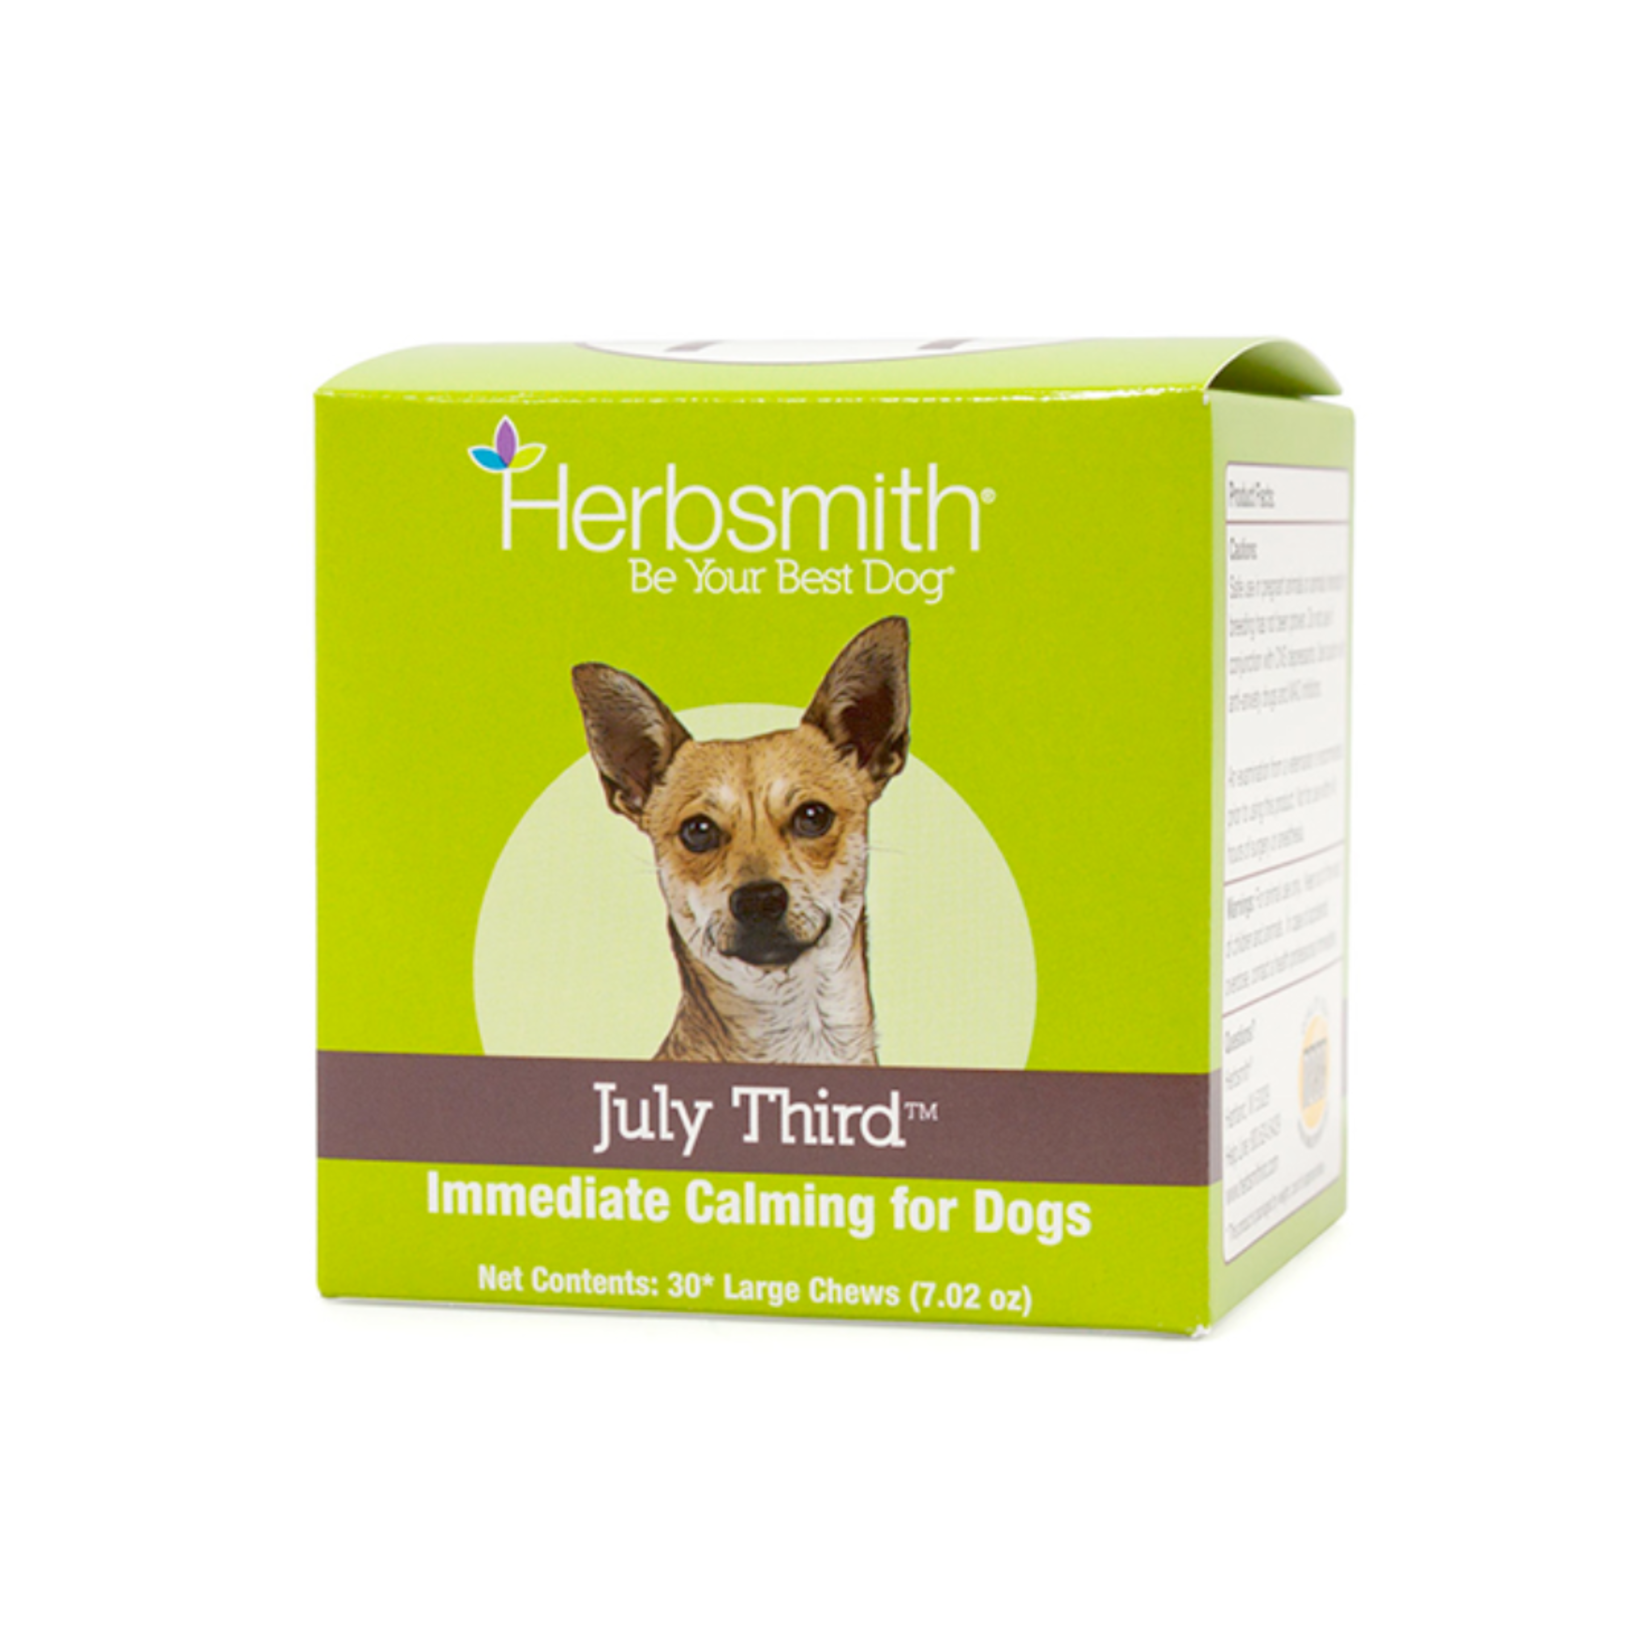 Herbsmith 30 Chews - July Third - Immediate Calming Supplement for Dogs - Herbsmith